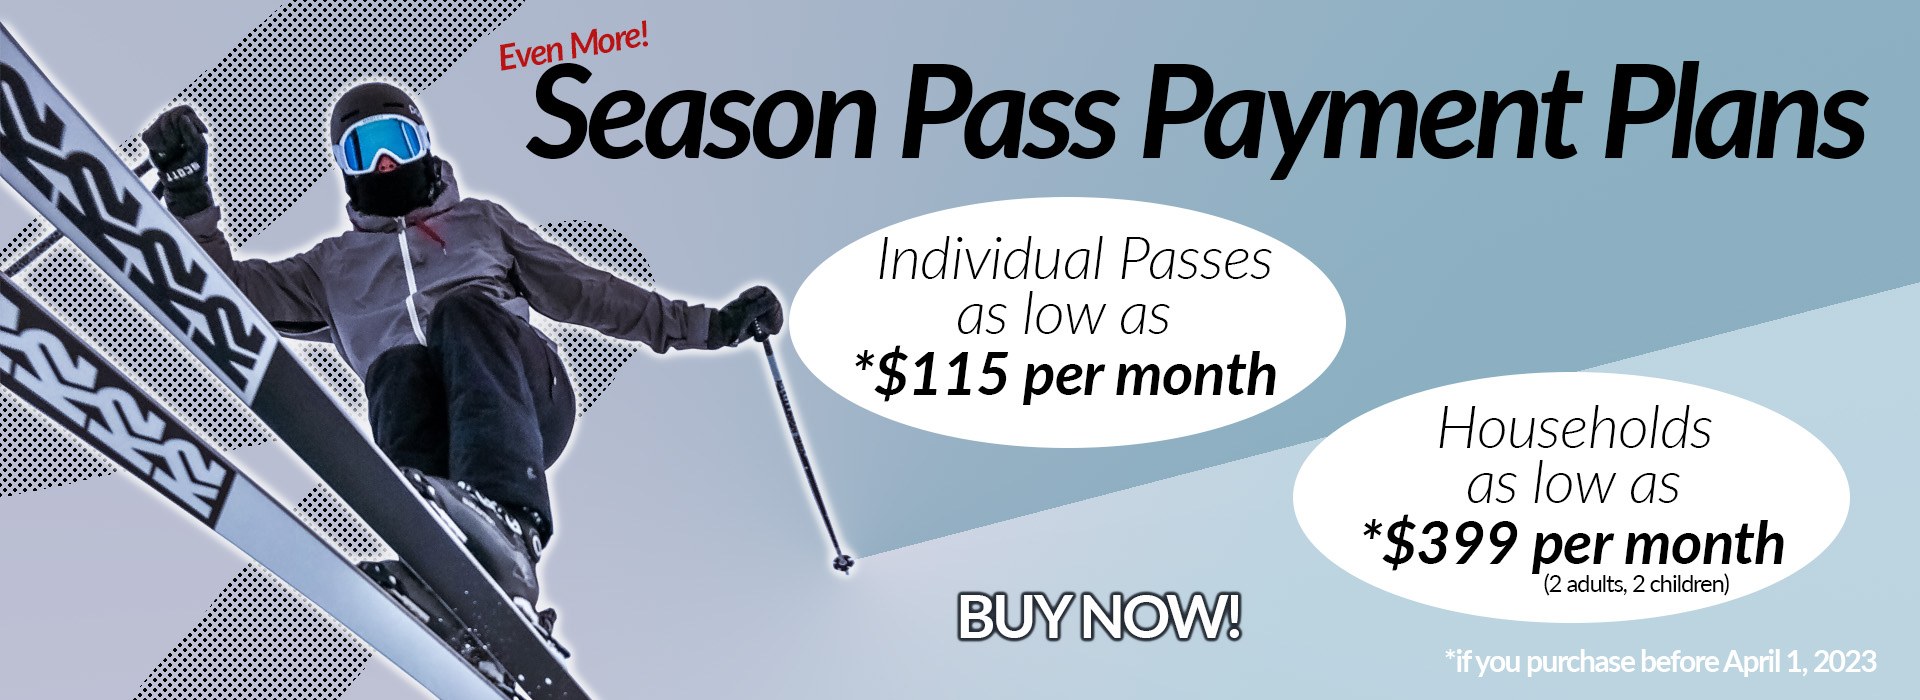 Season Pass payment plans available